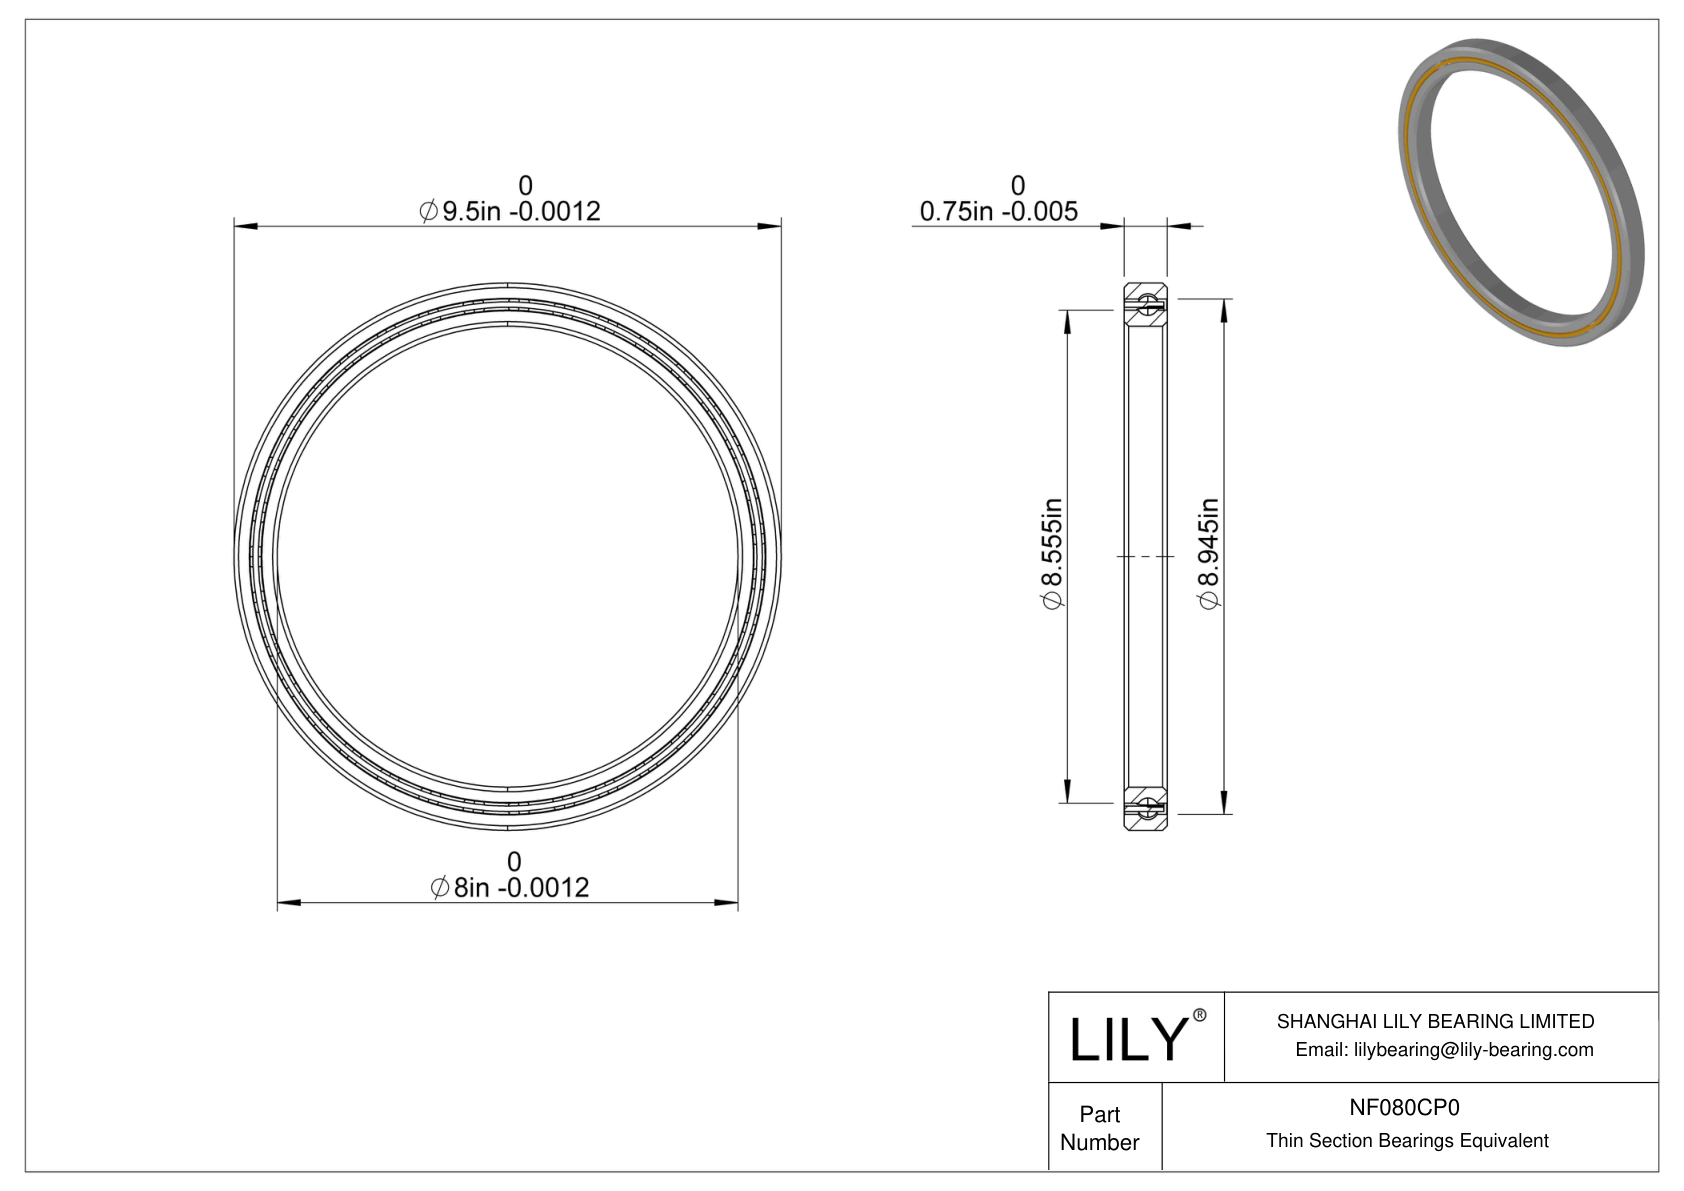 NF080CP0 Constant Section (CS) Bearings cad drawing